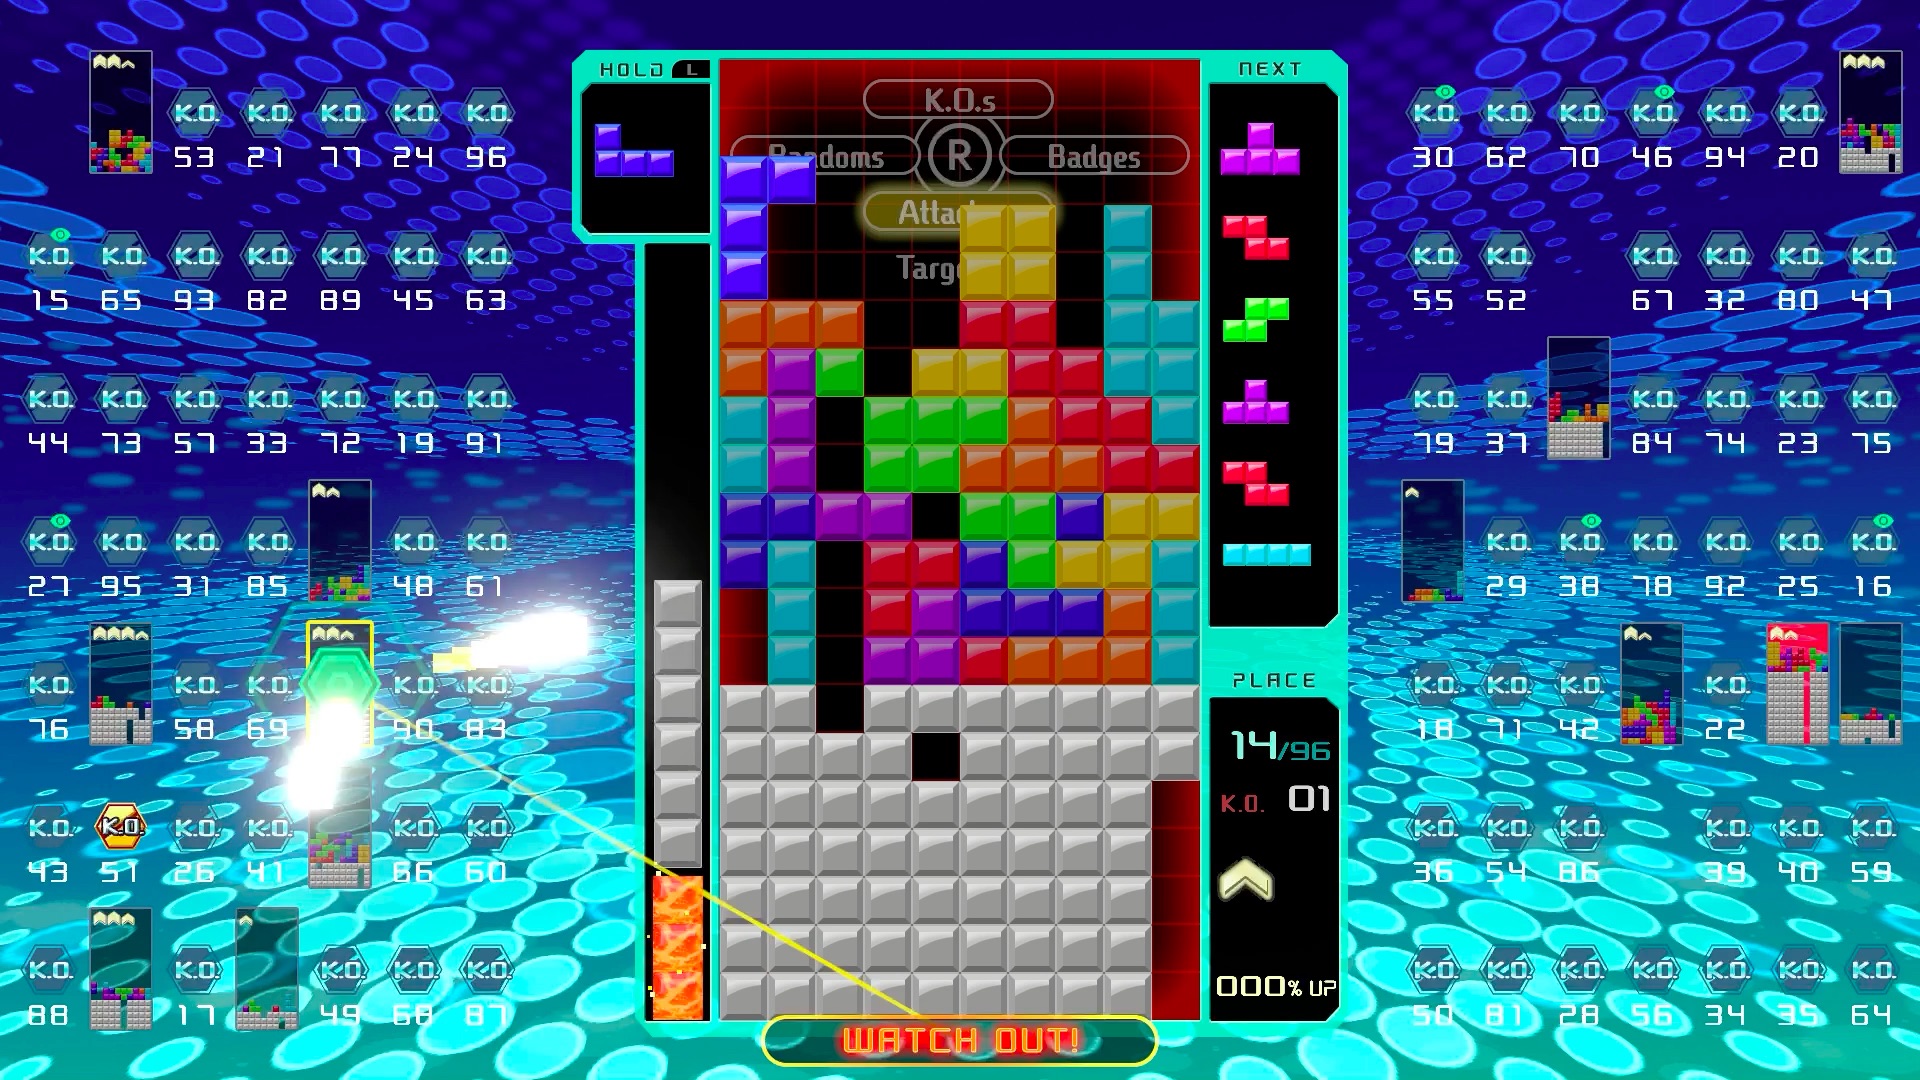 Anyone know a game like tetris except the blocks which have empty